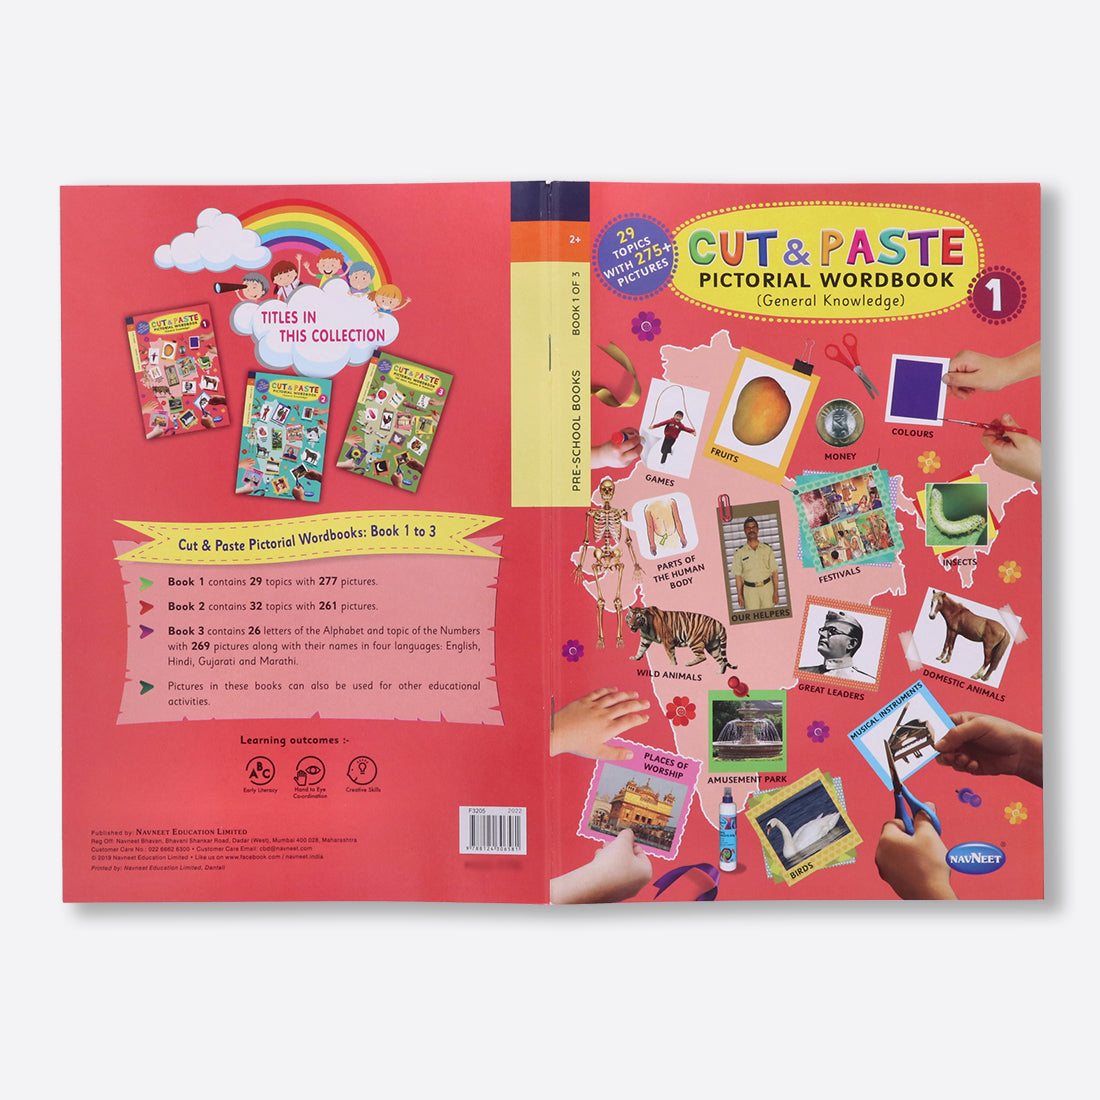 Cut & Paste Pictorial Chart Book - Word book - GK - Educational Projects & Scrap Books -Set of 3 (Eng-Hin-Guj-Mar): Learn Scissor skill - 325+ topics - 900+ pictures